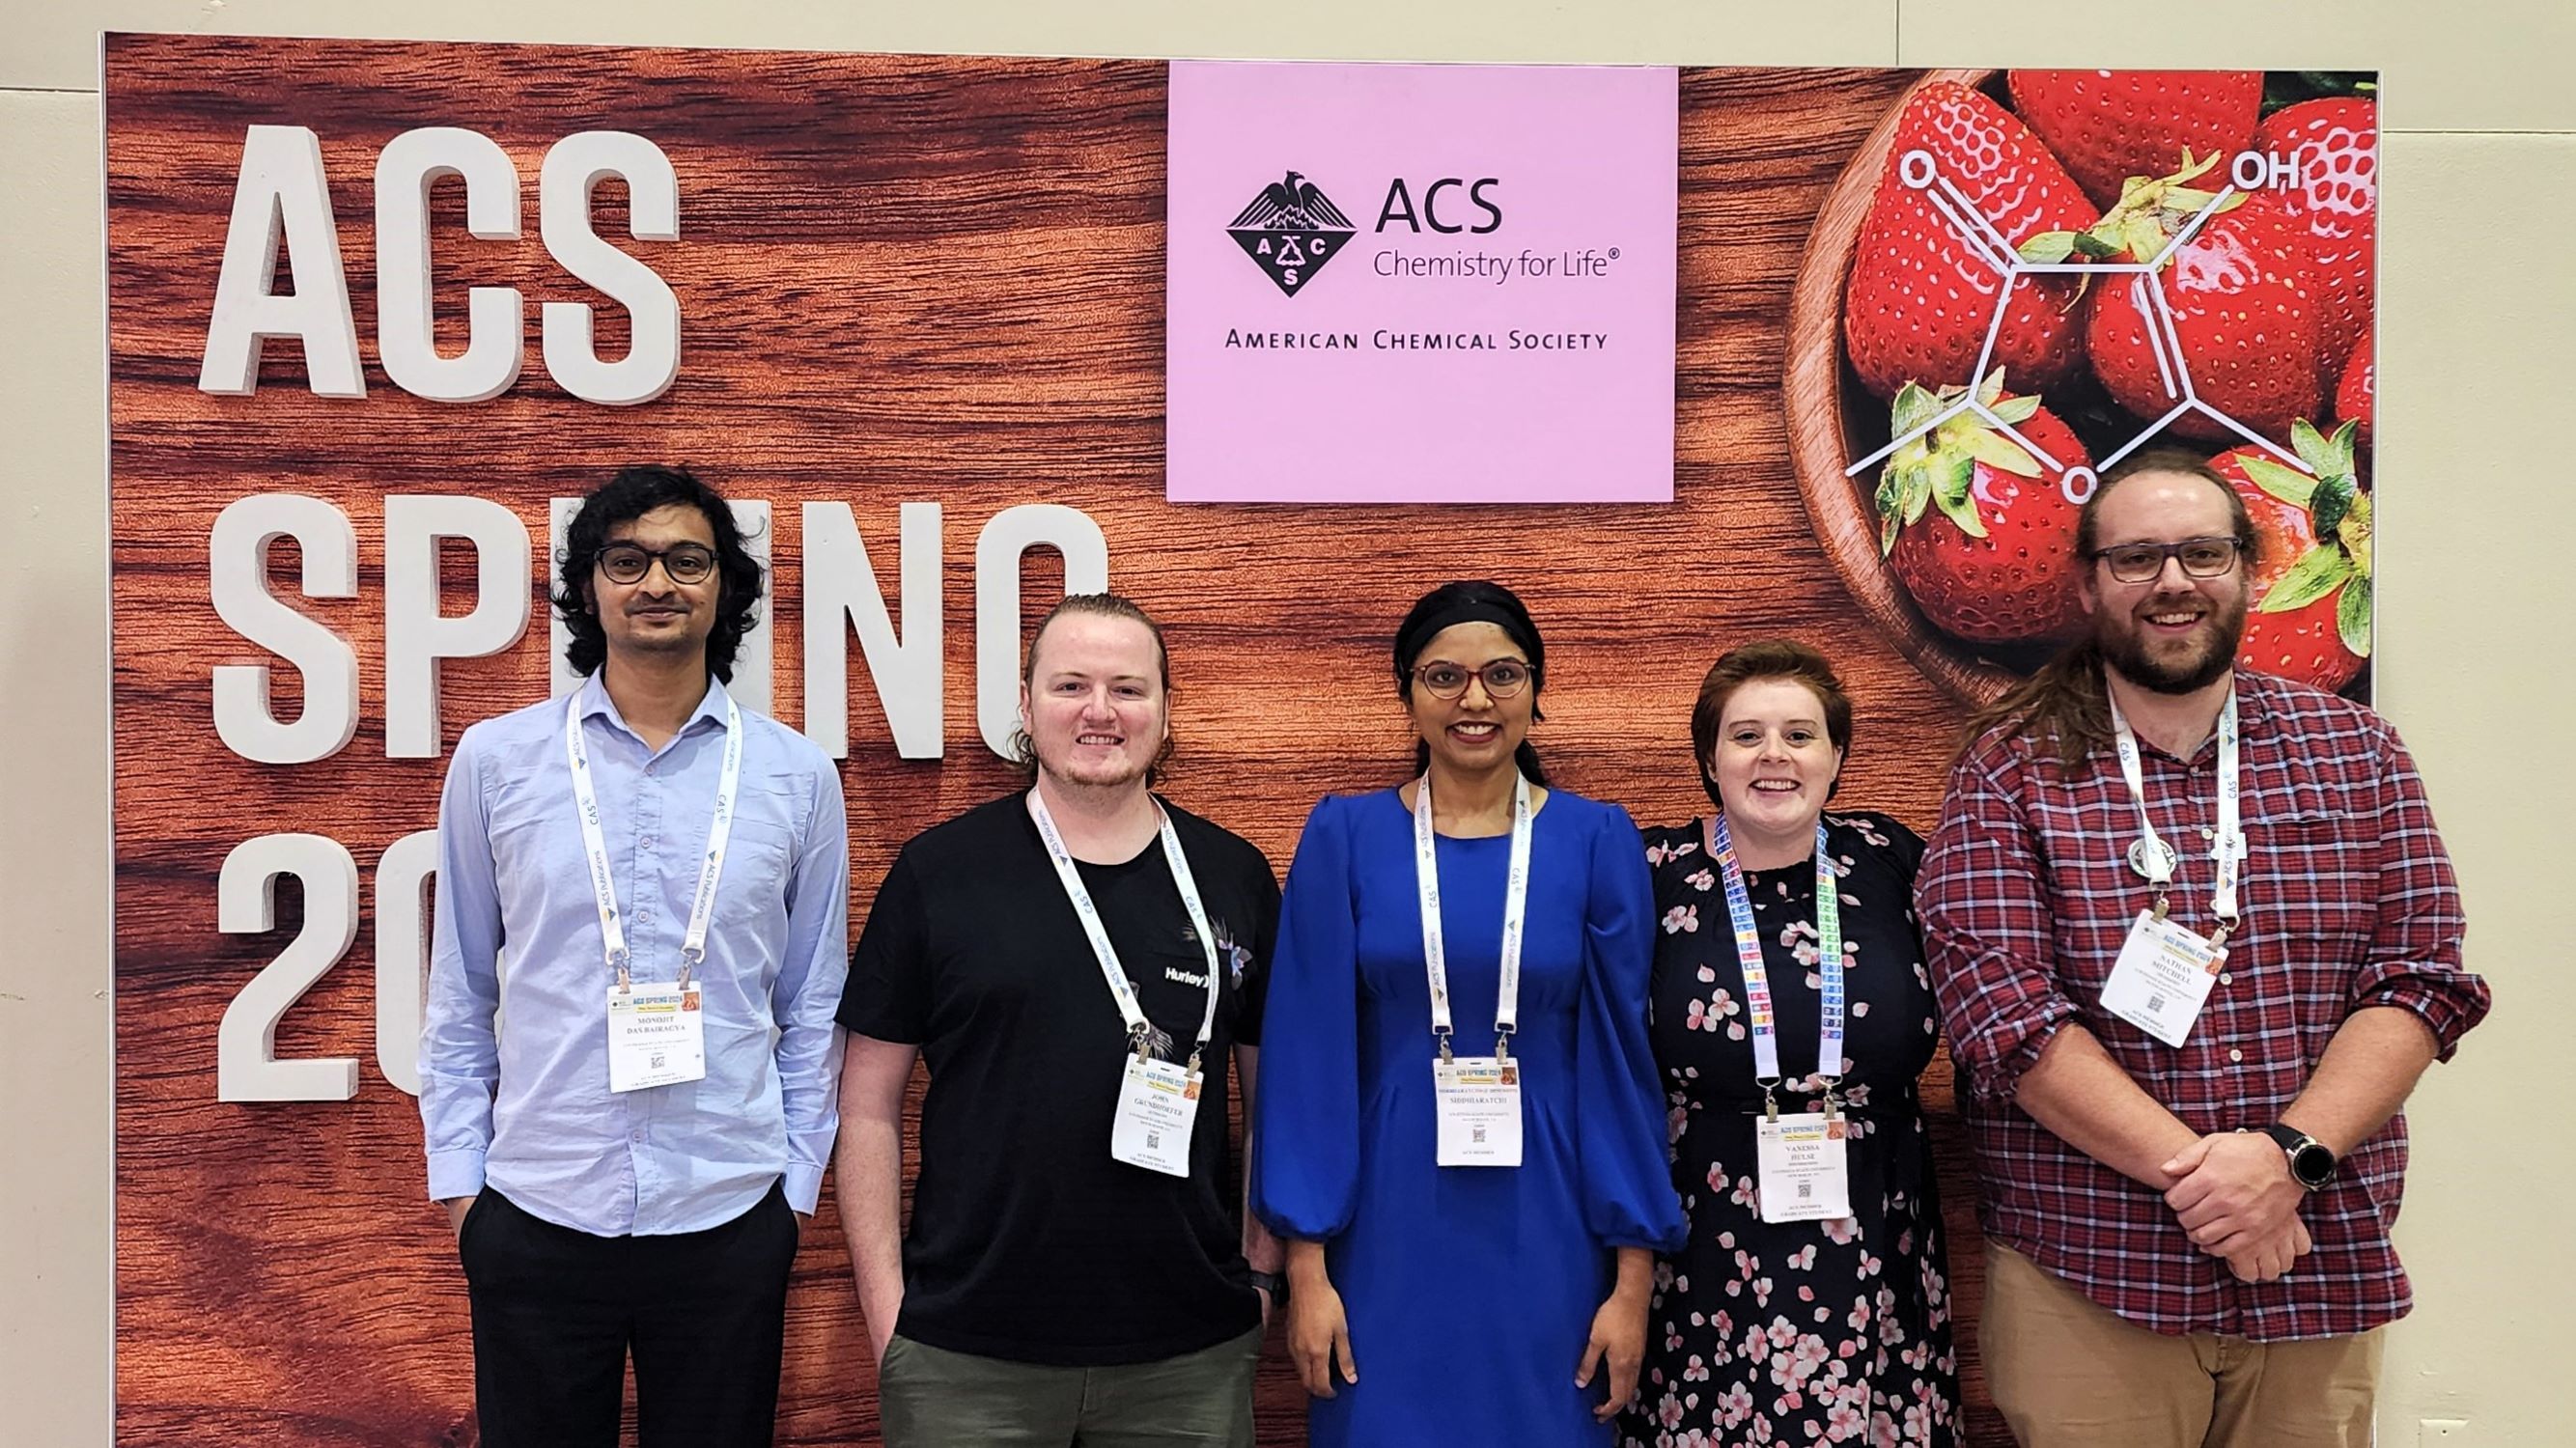 The group at the acs